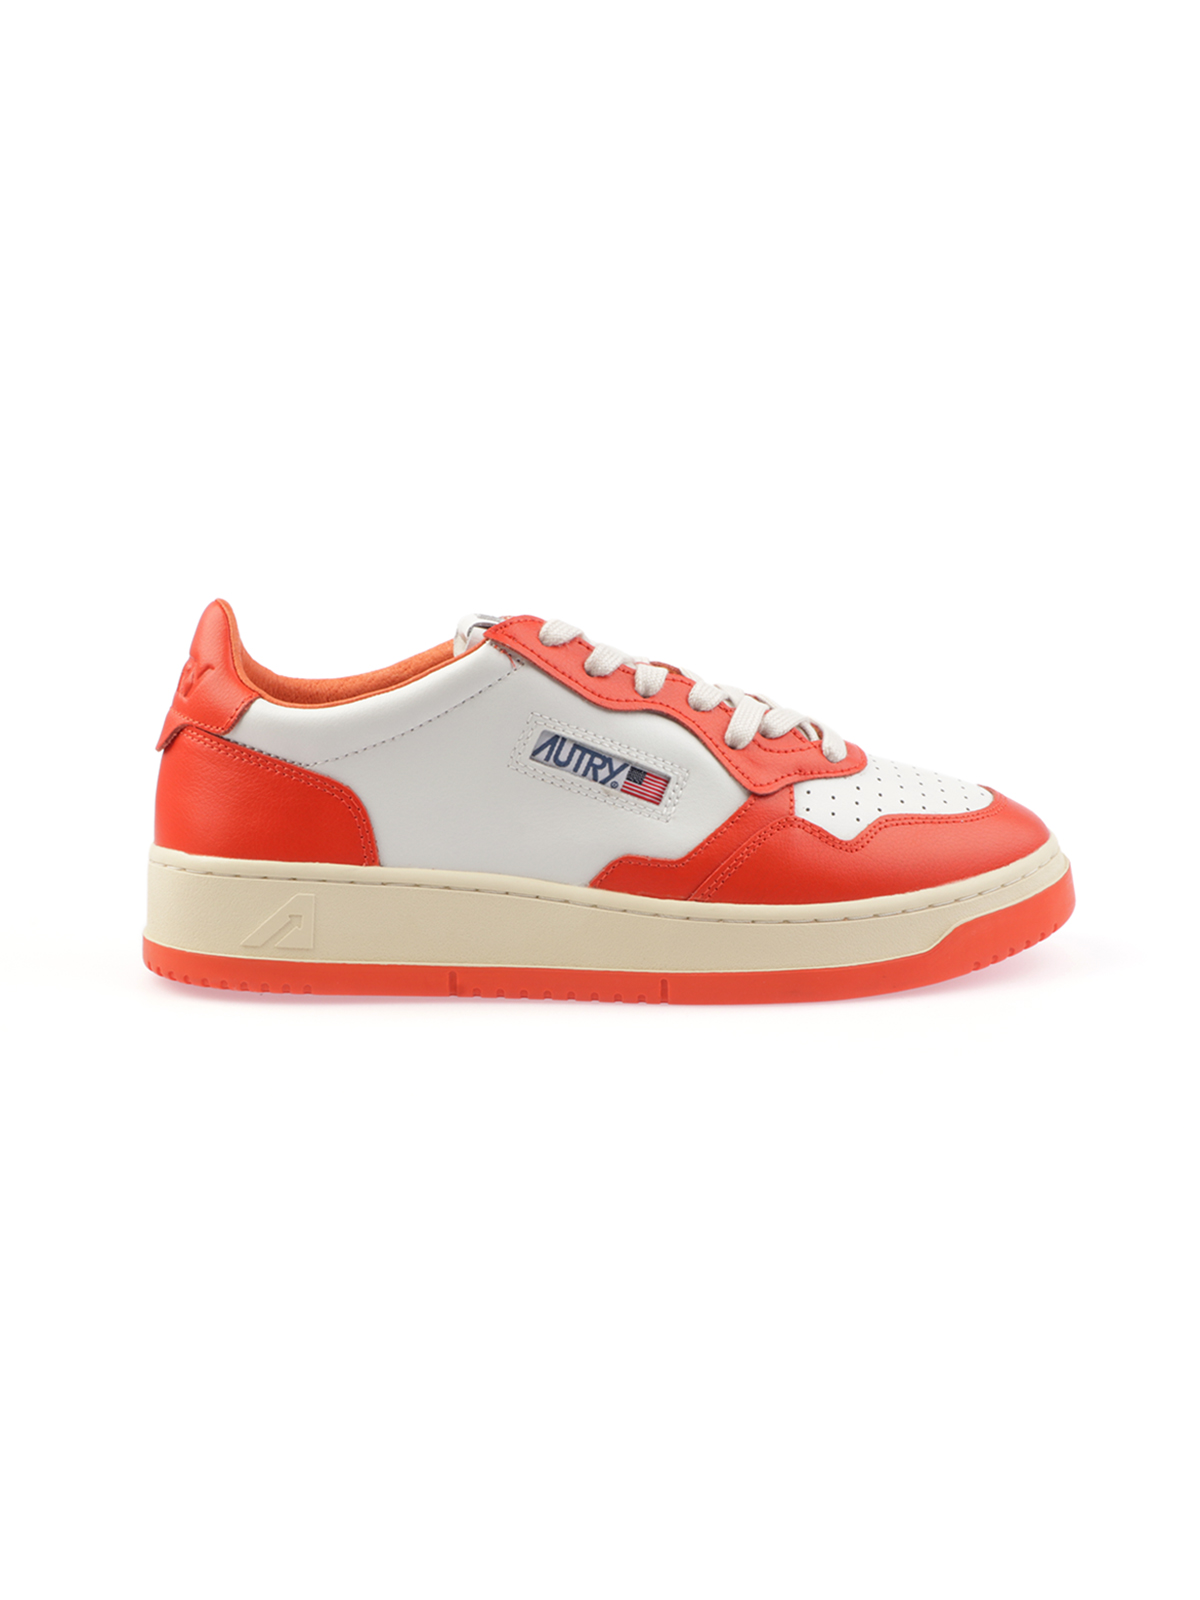 AUTRY Men's Medalist Low Biccolor Leather Sneakers White/Tangerine ...